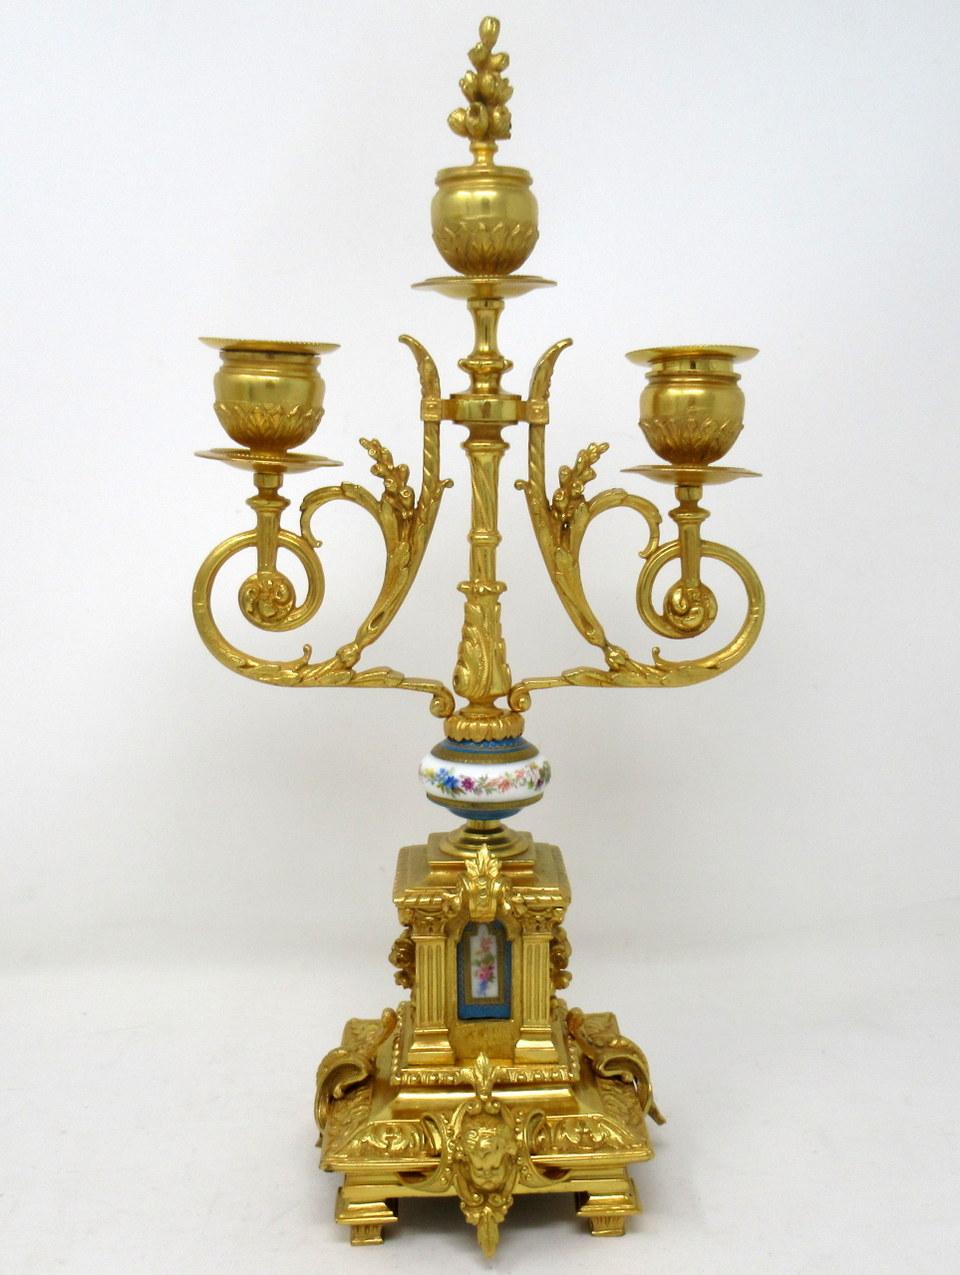 A fine stylish and imposing pair of French three-light table or mantle Sèvres Porcelain ormolu mounted candelabra of outstanding quality, mid-late 19th century.

Each with twin scrolling and one central branch above a porcelain hand decorated